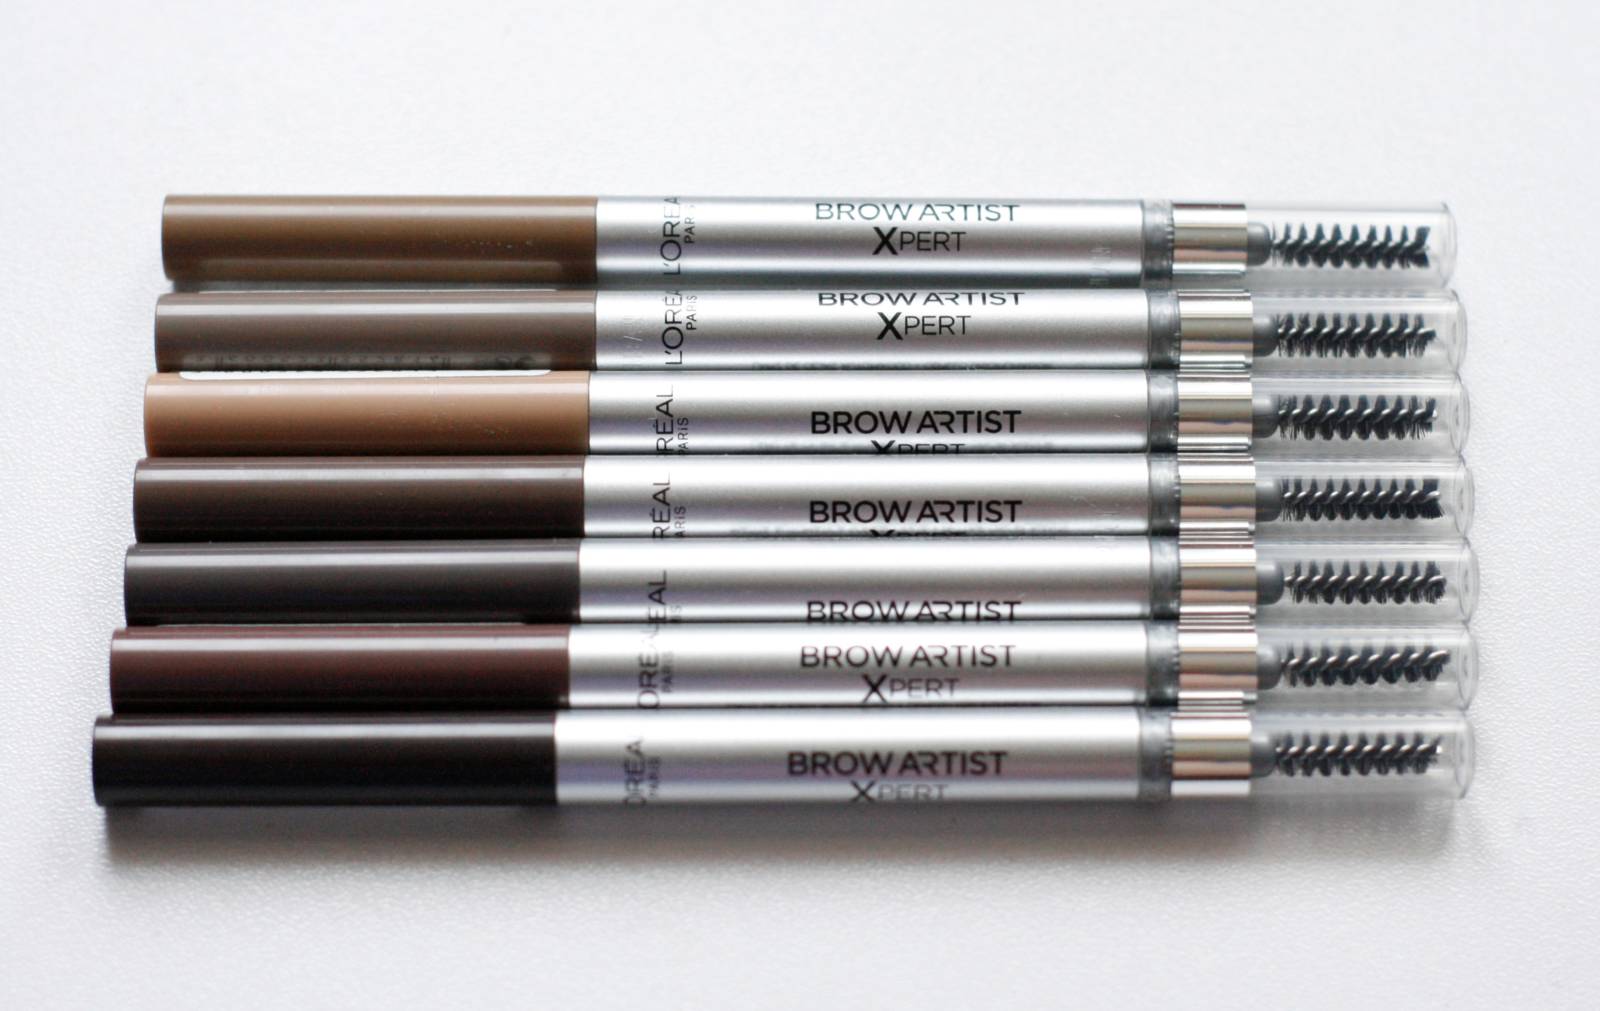 Loreal Paris Brow Artist Xpert Review And Swatches 